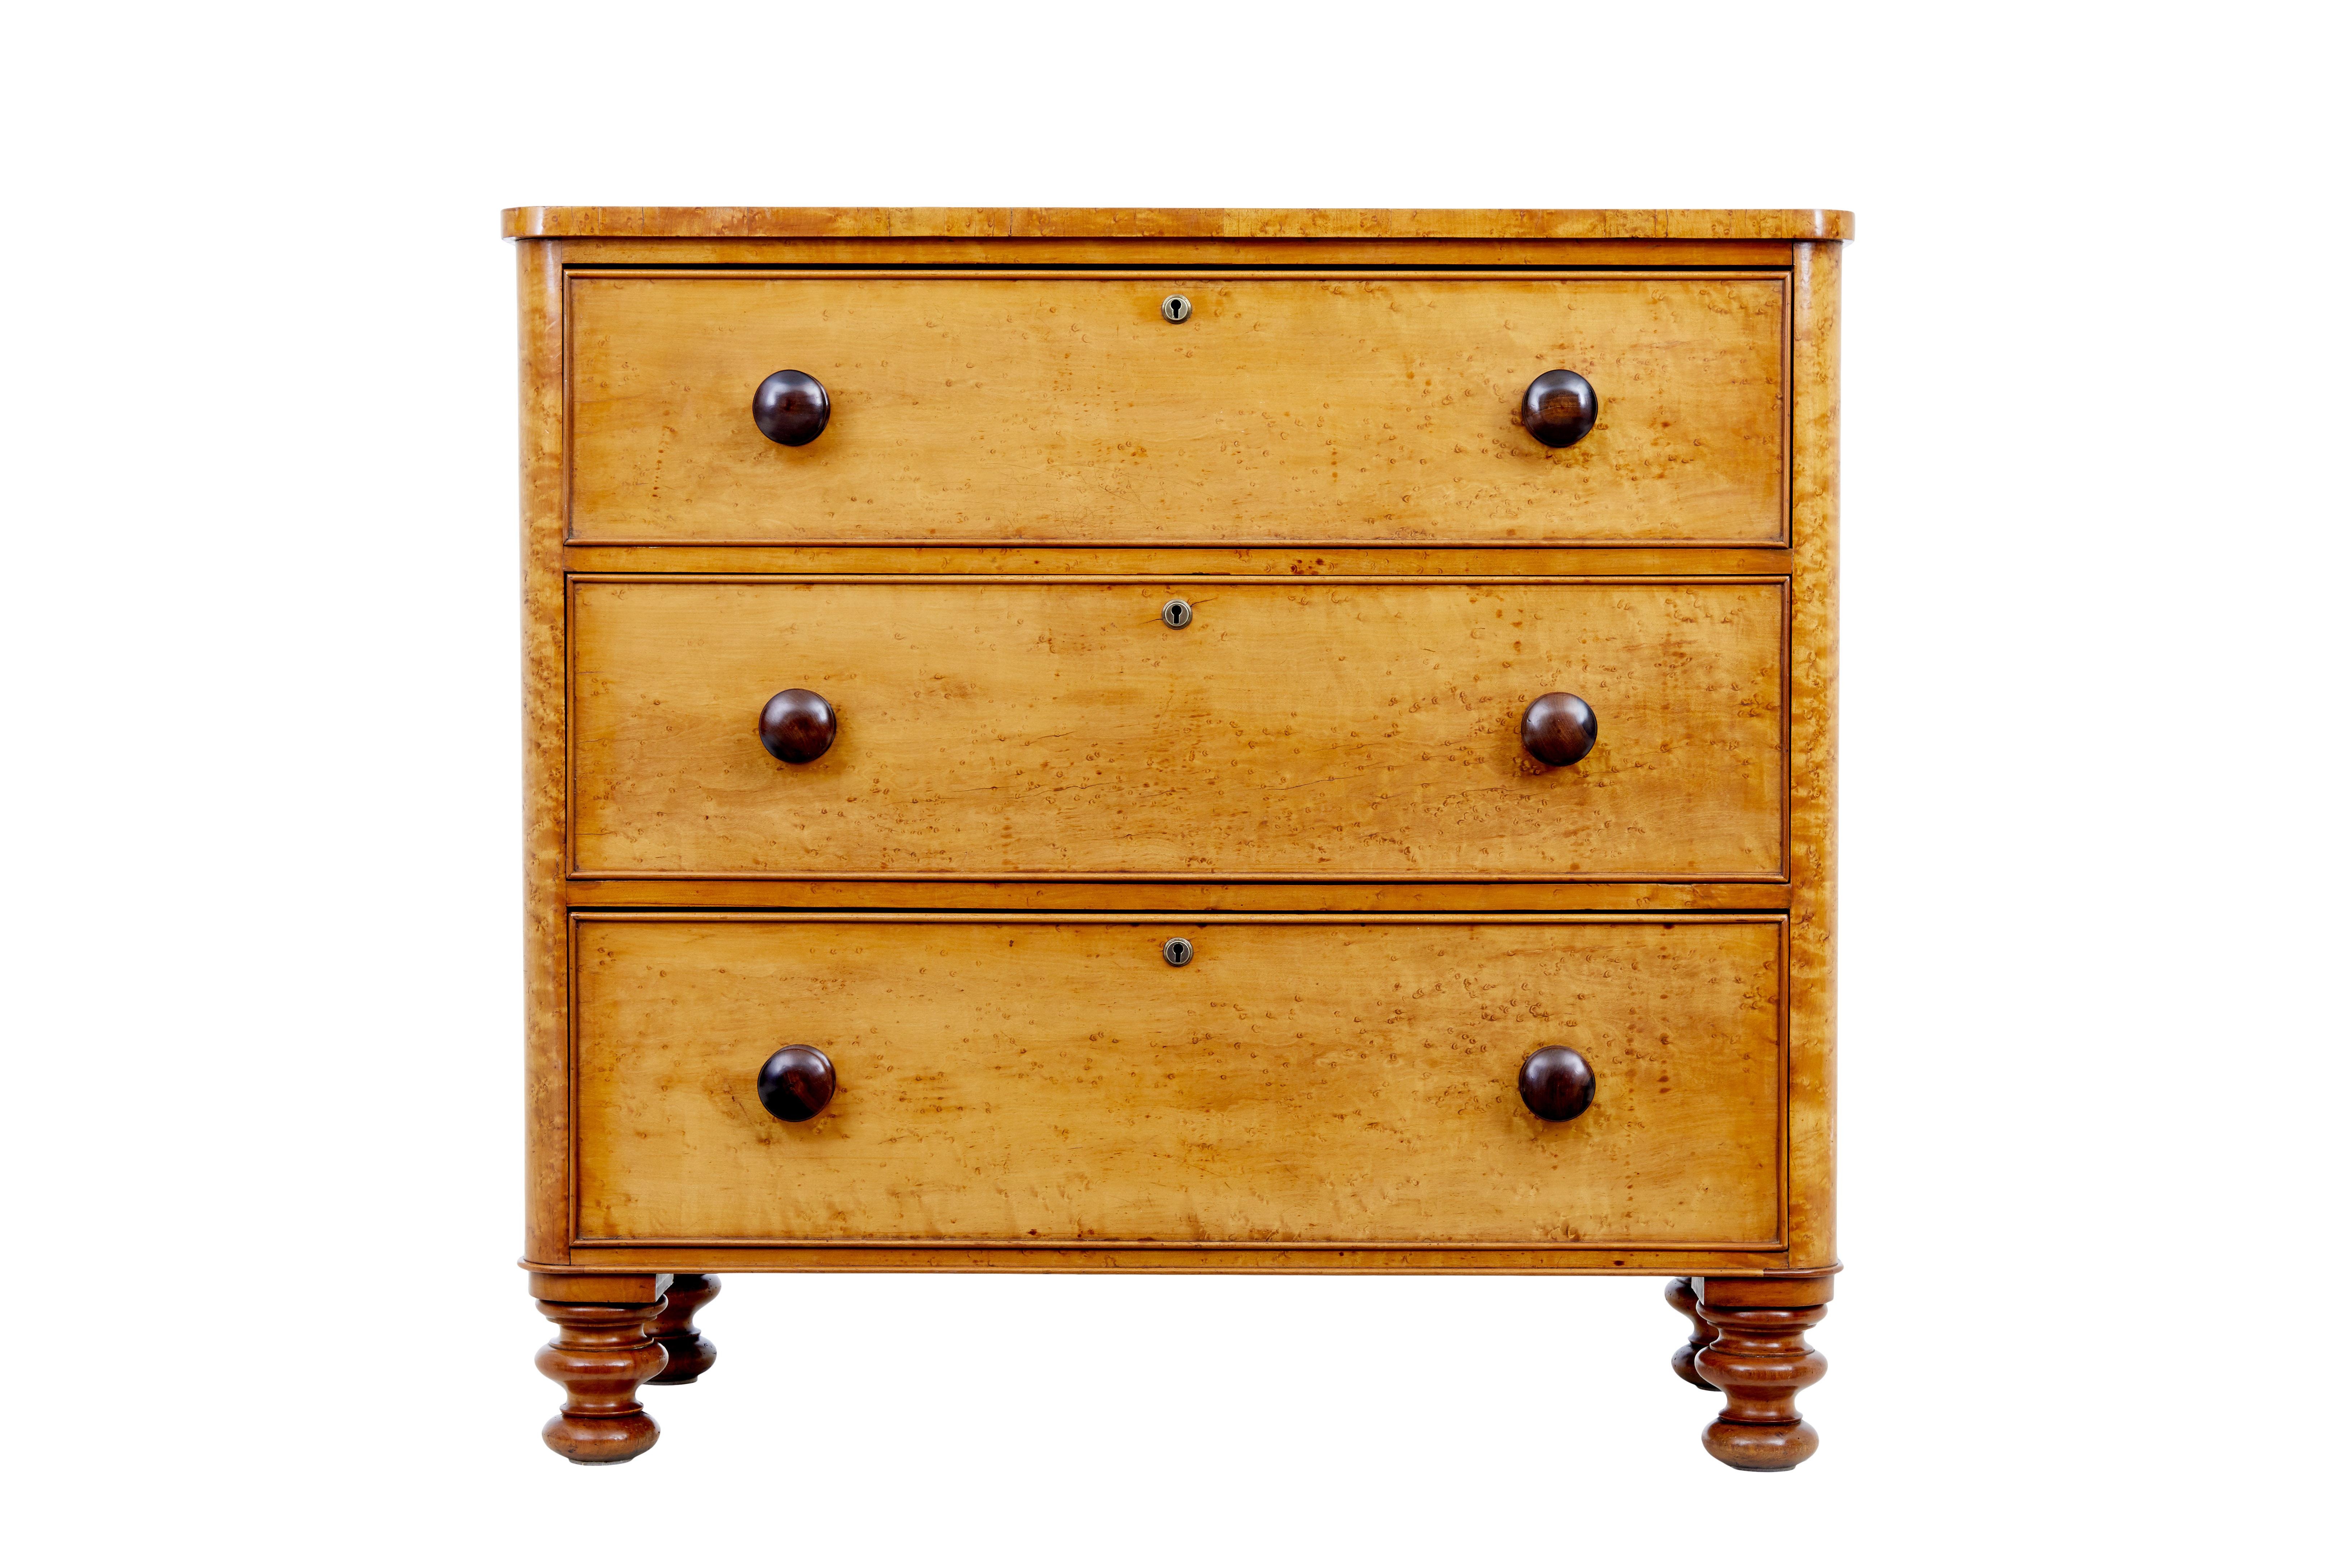 19th century birds eye maple chest of drawers circa 1870.

Good quality English chest of drawers made out of bird's eye maple, which gives a stunning colour and grain to the timber.

Fitted with 3 drawers, each with cock beaded edging and fitted